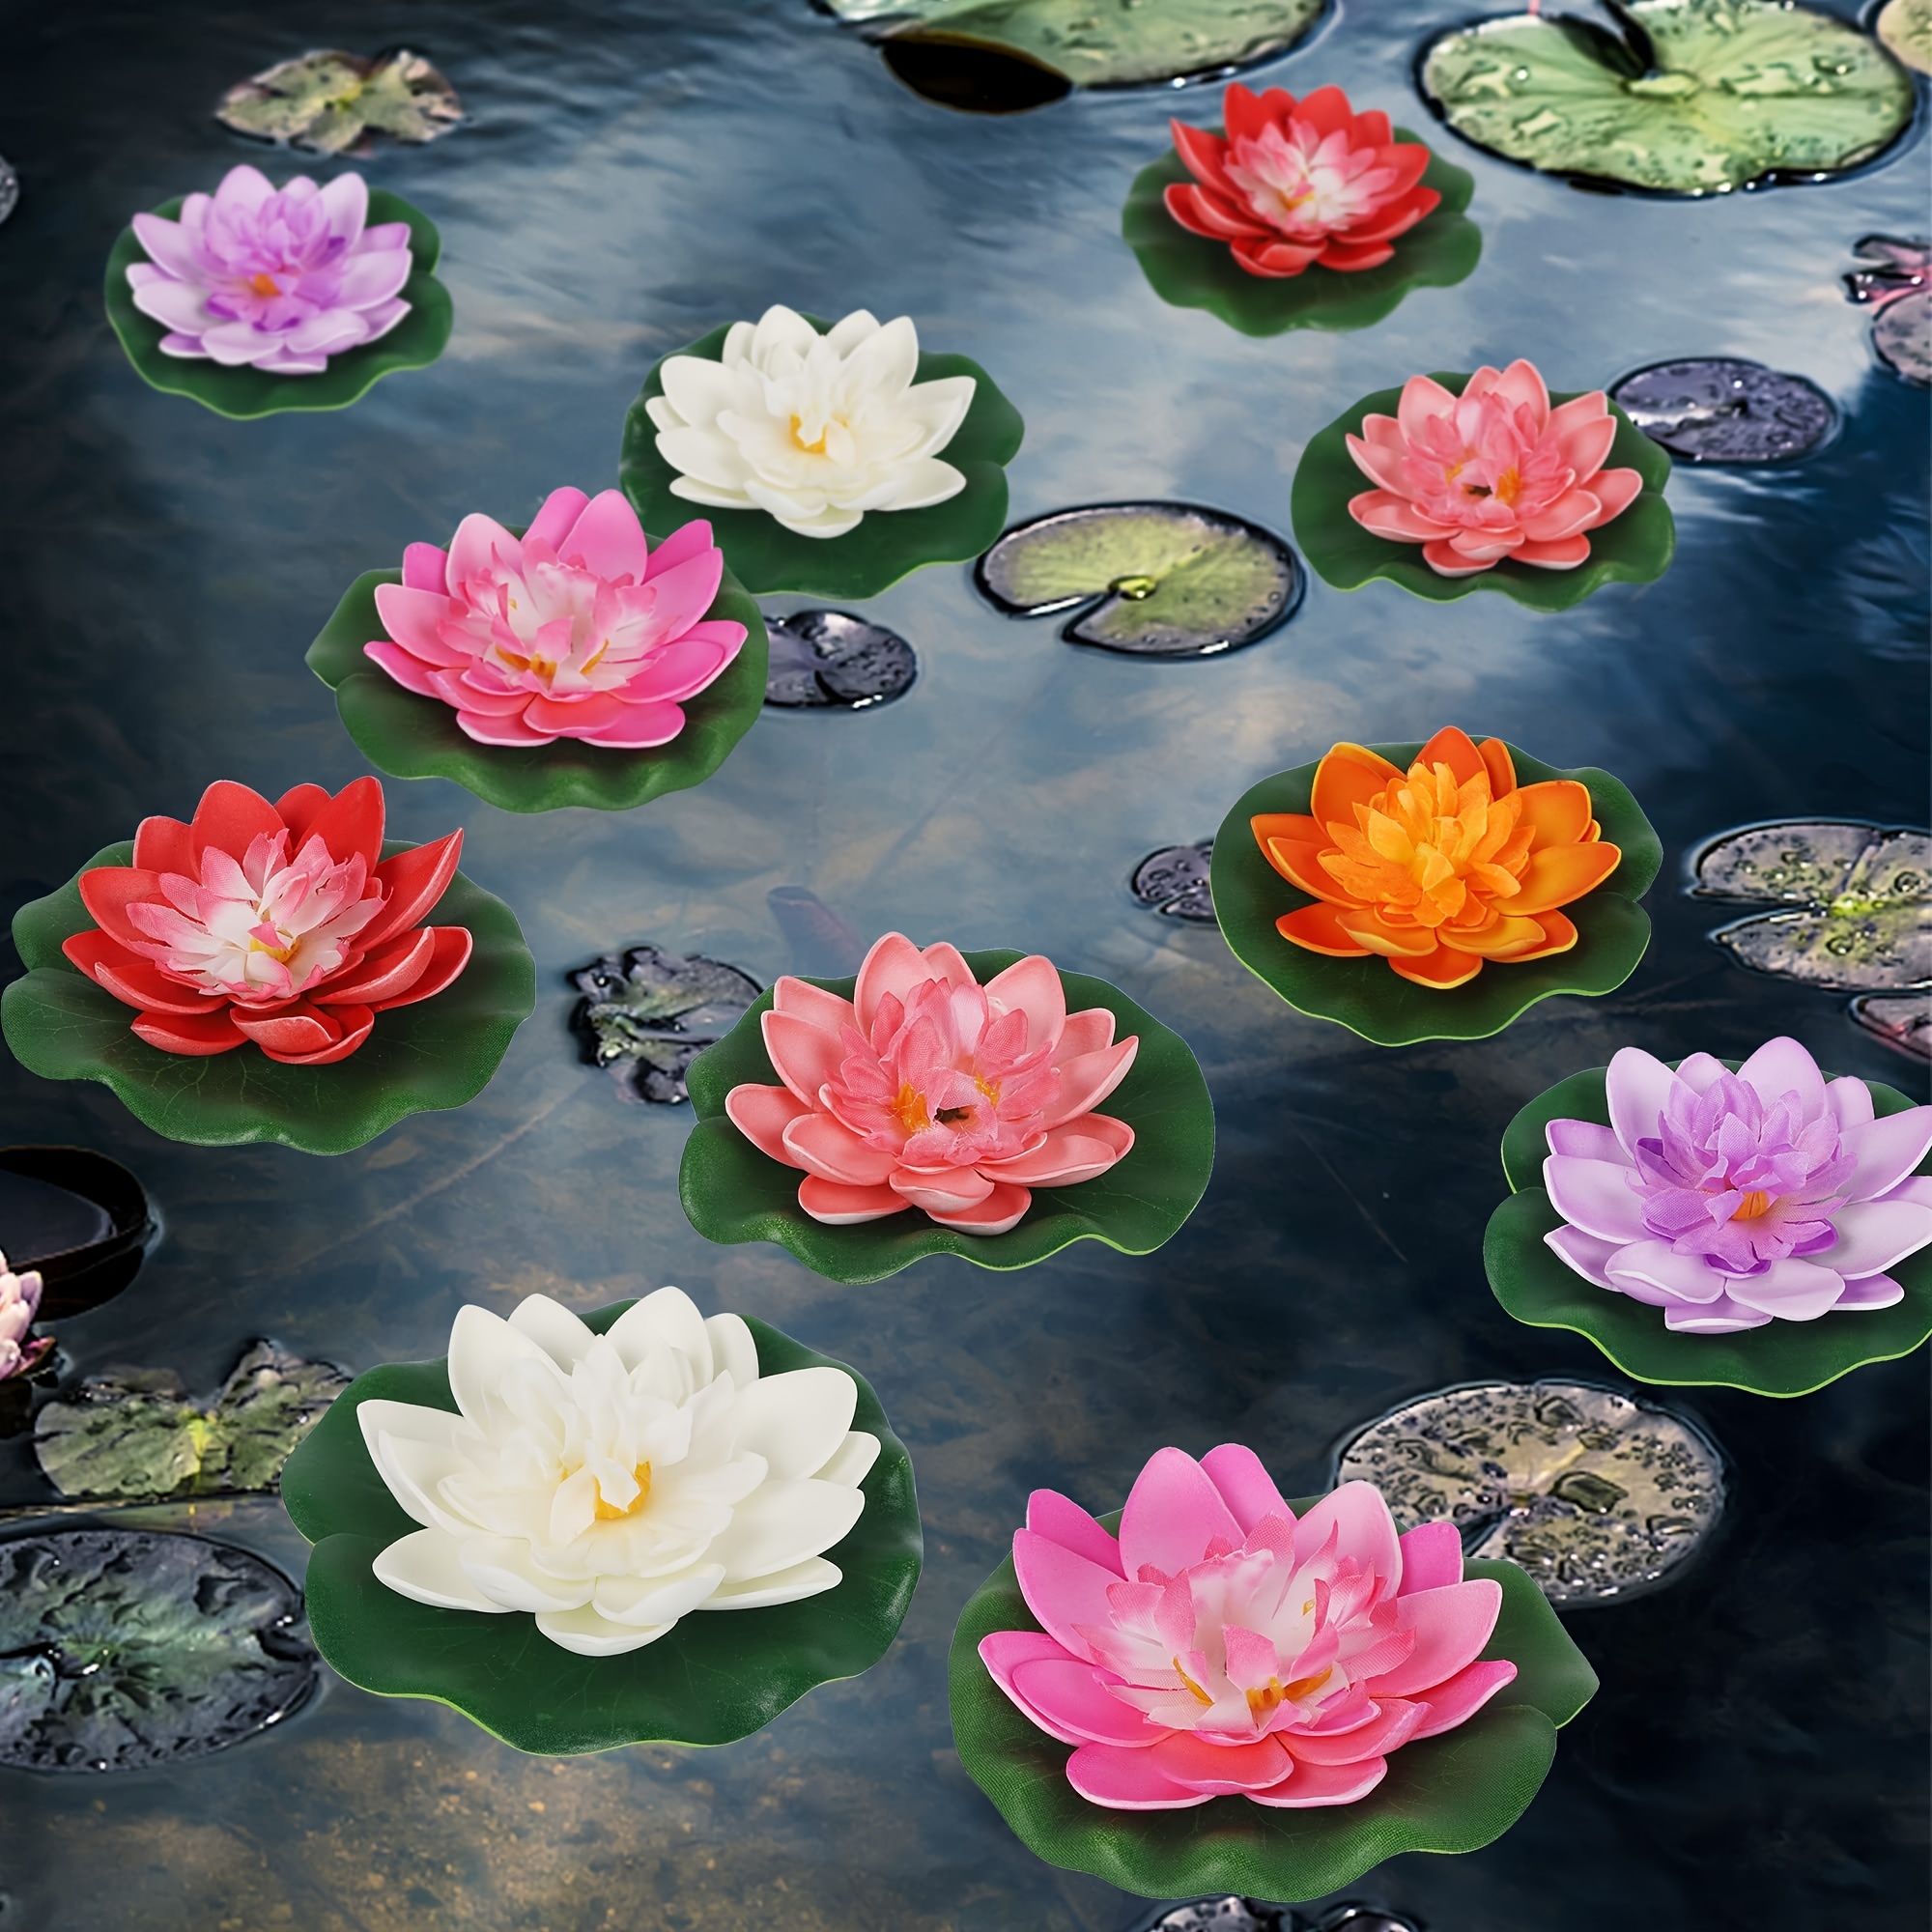 

6pcs/12pcs Artificial Floating Foam Lotus Flower With Water Lily Pad, Lifelike Ornament Perfect For Home Garden Pond Decor Indian Diwali Decorations Return Gifts